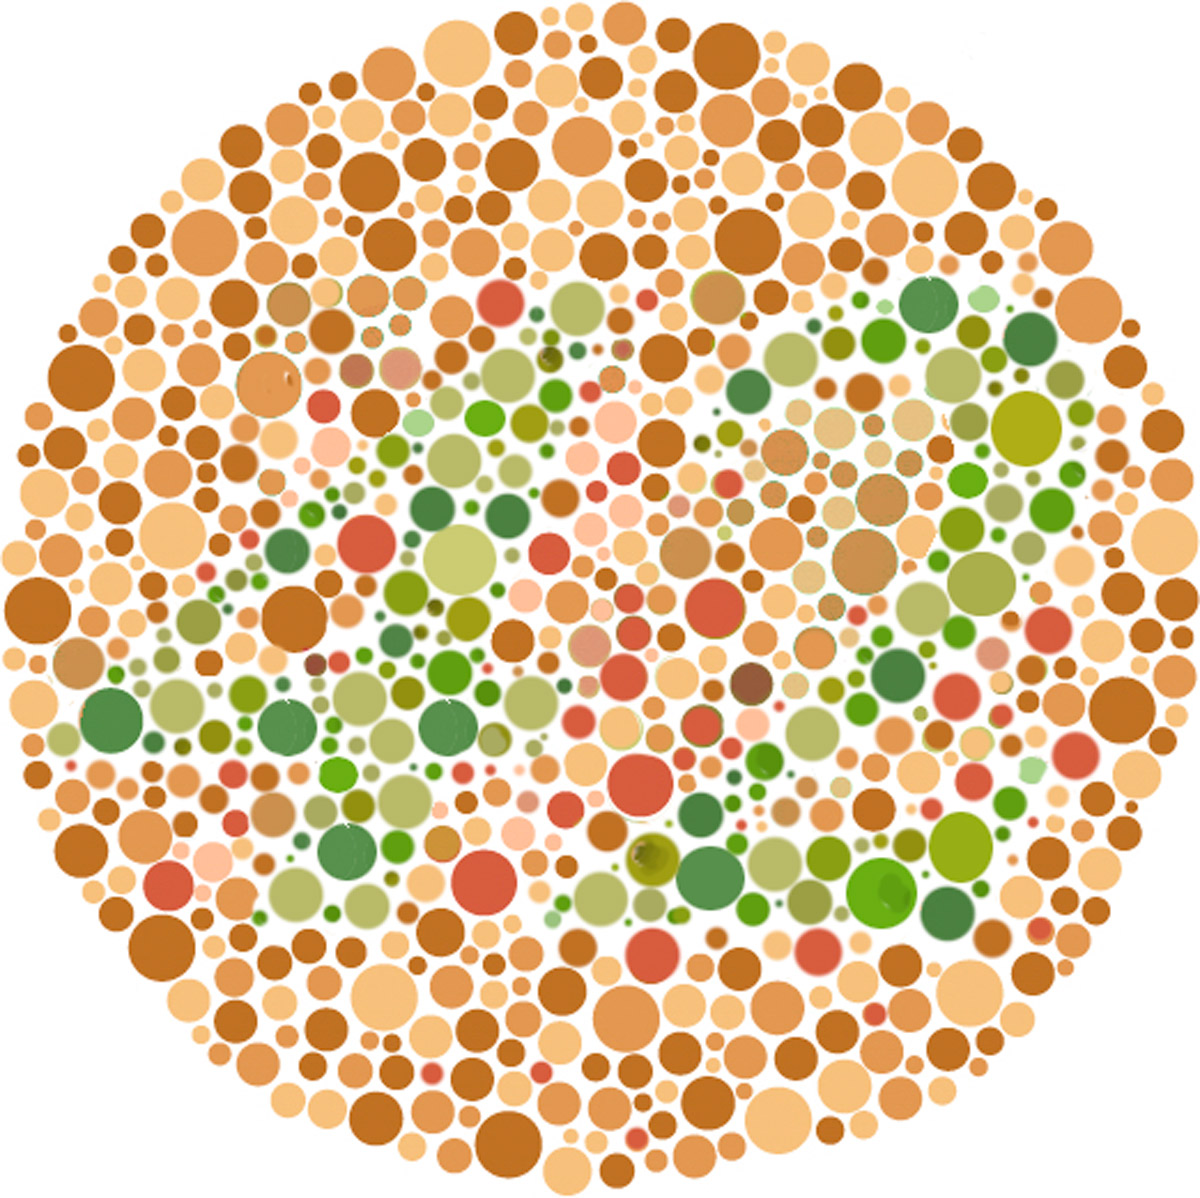 Are you Color Blind? | SiOWfa16: Science in Our World: Certainty and